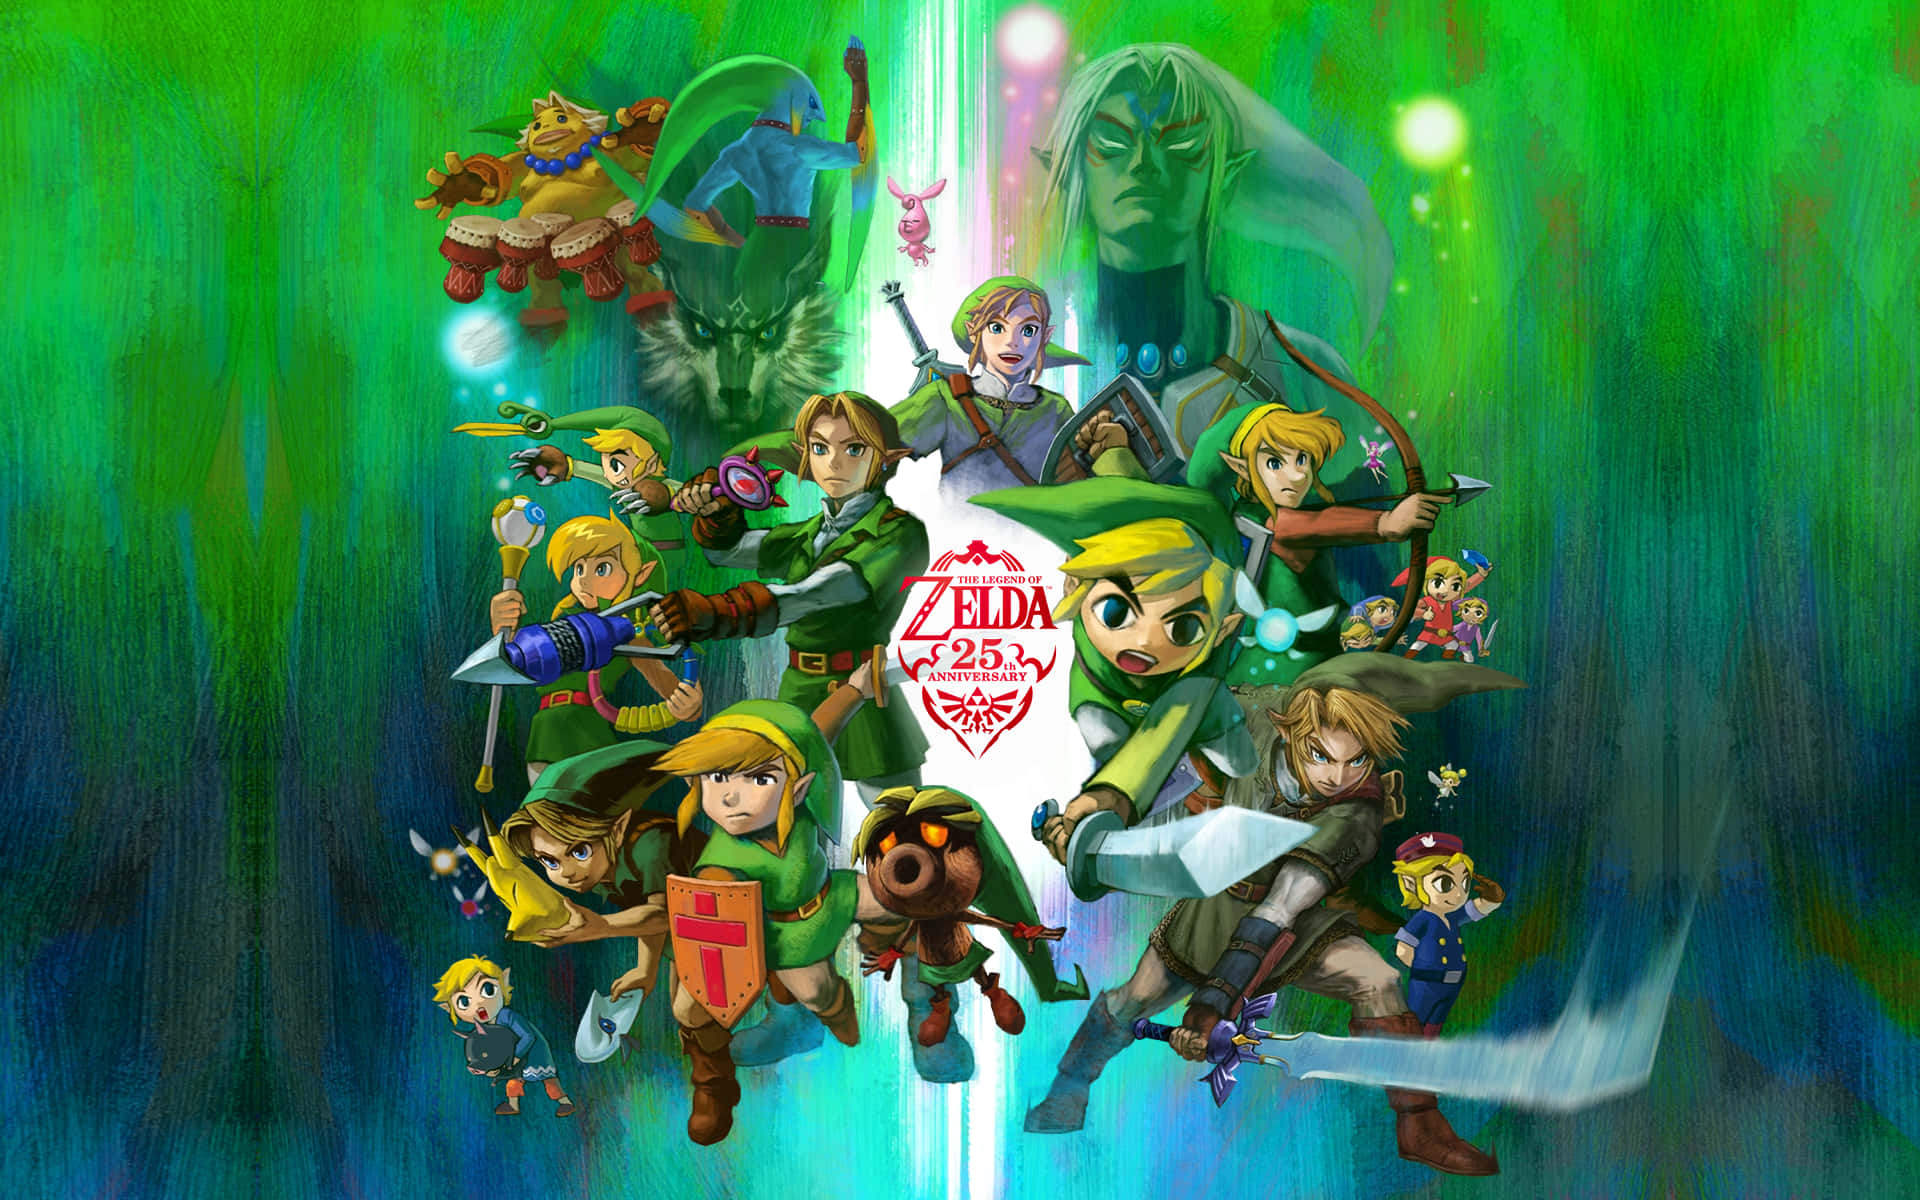 Step Boldy Into The Adventure With Toon Link!